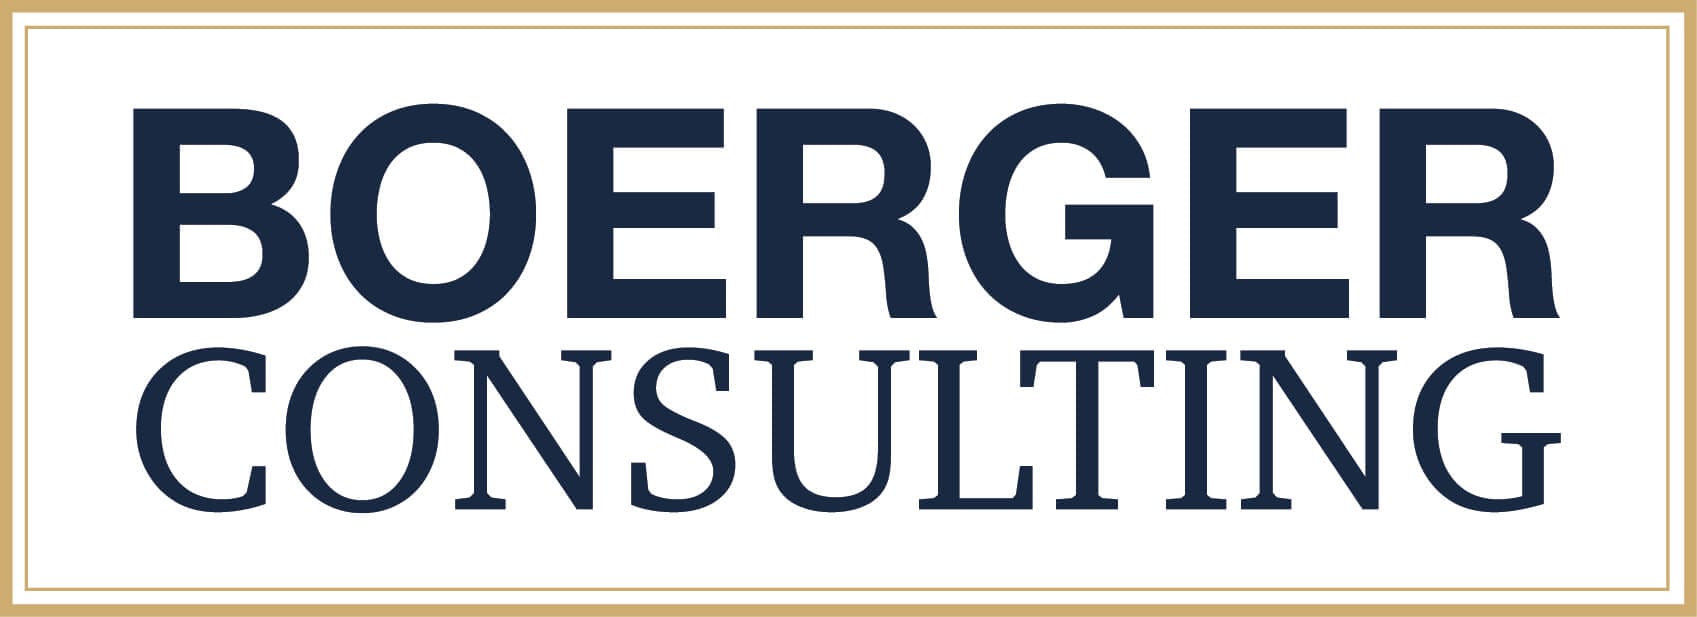 Boerger Consulting